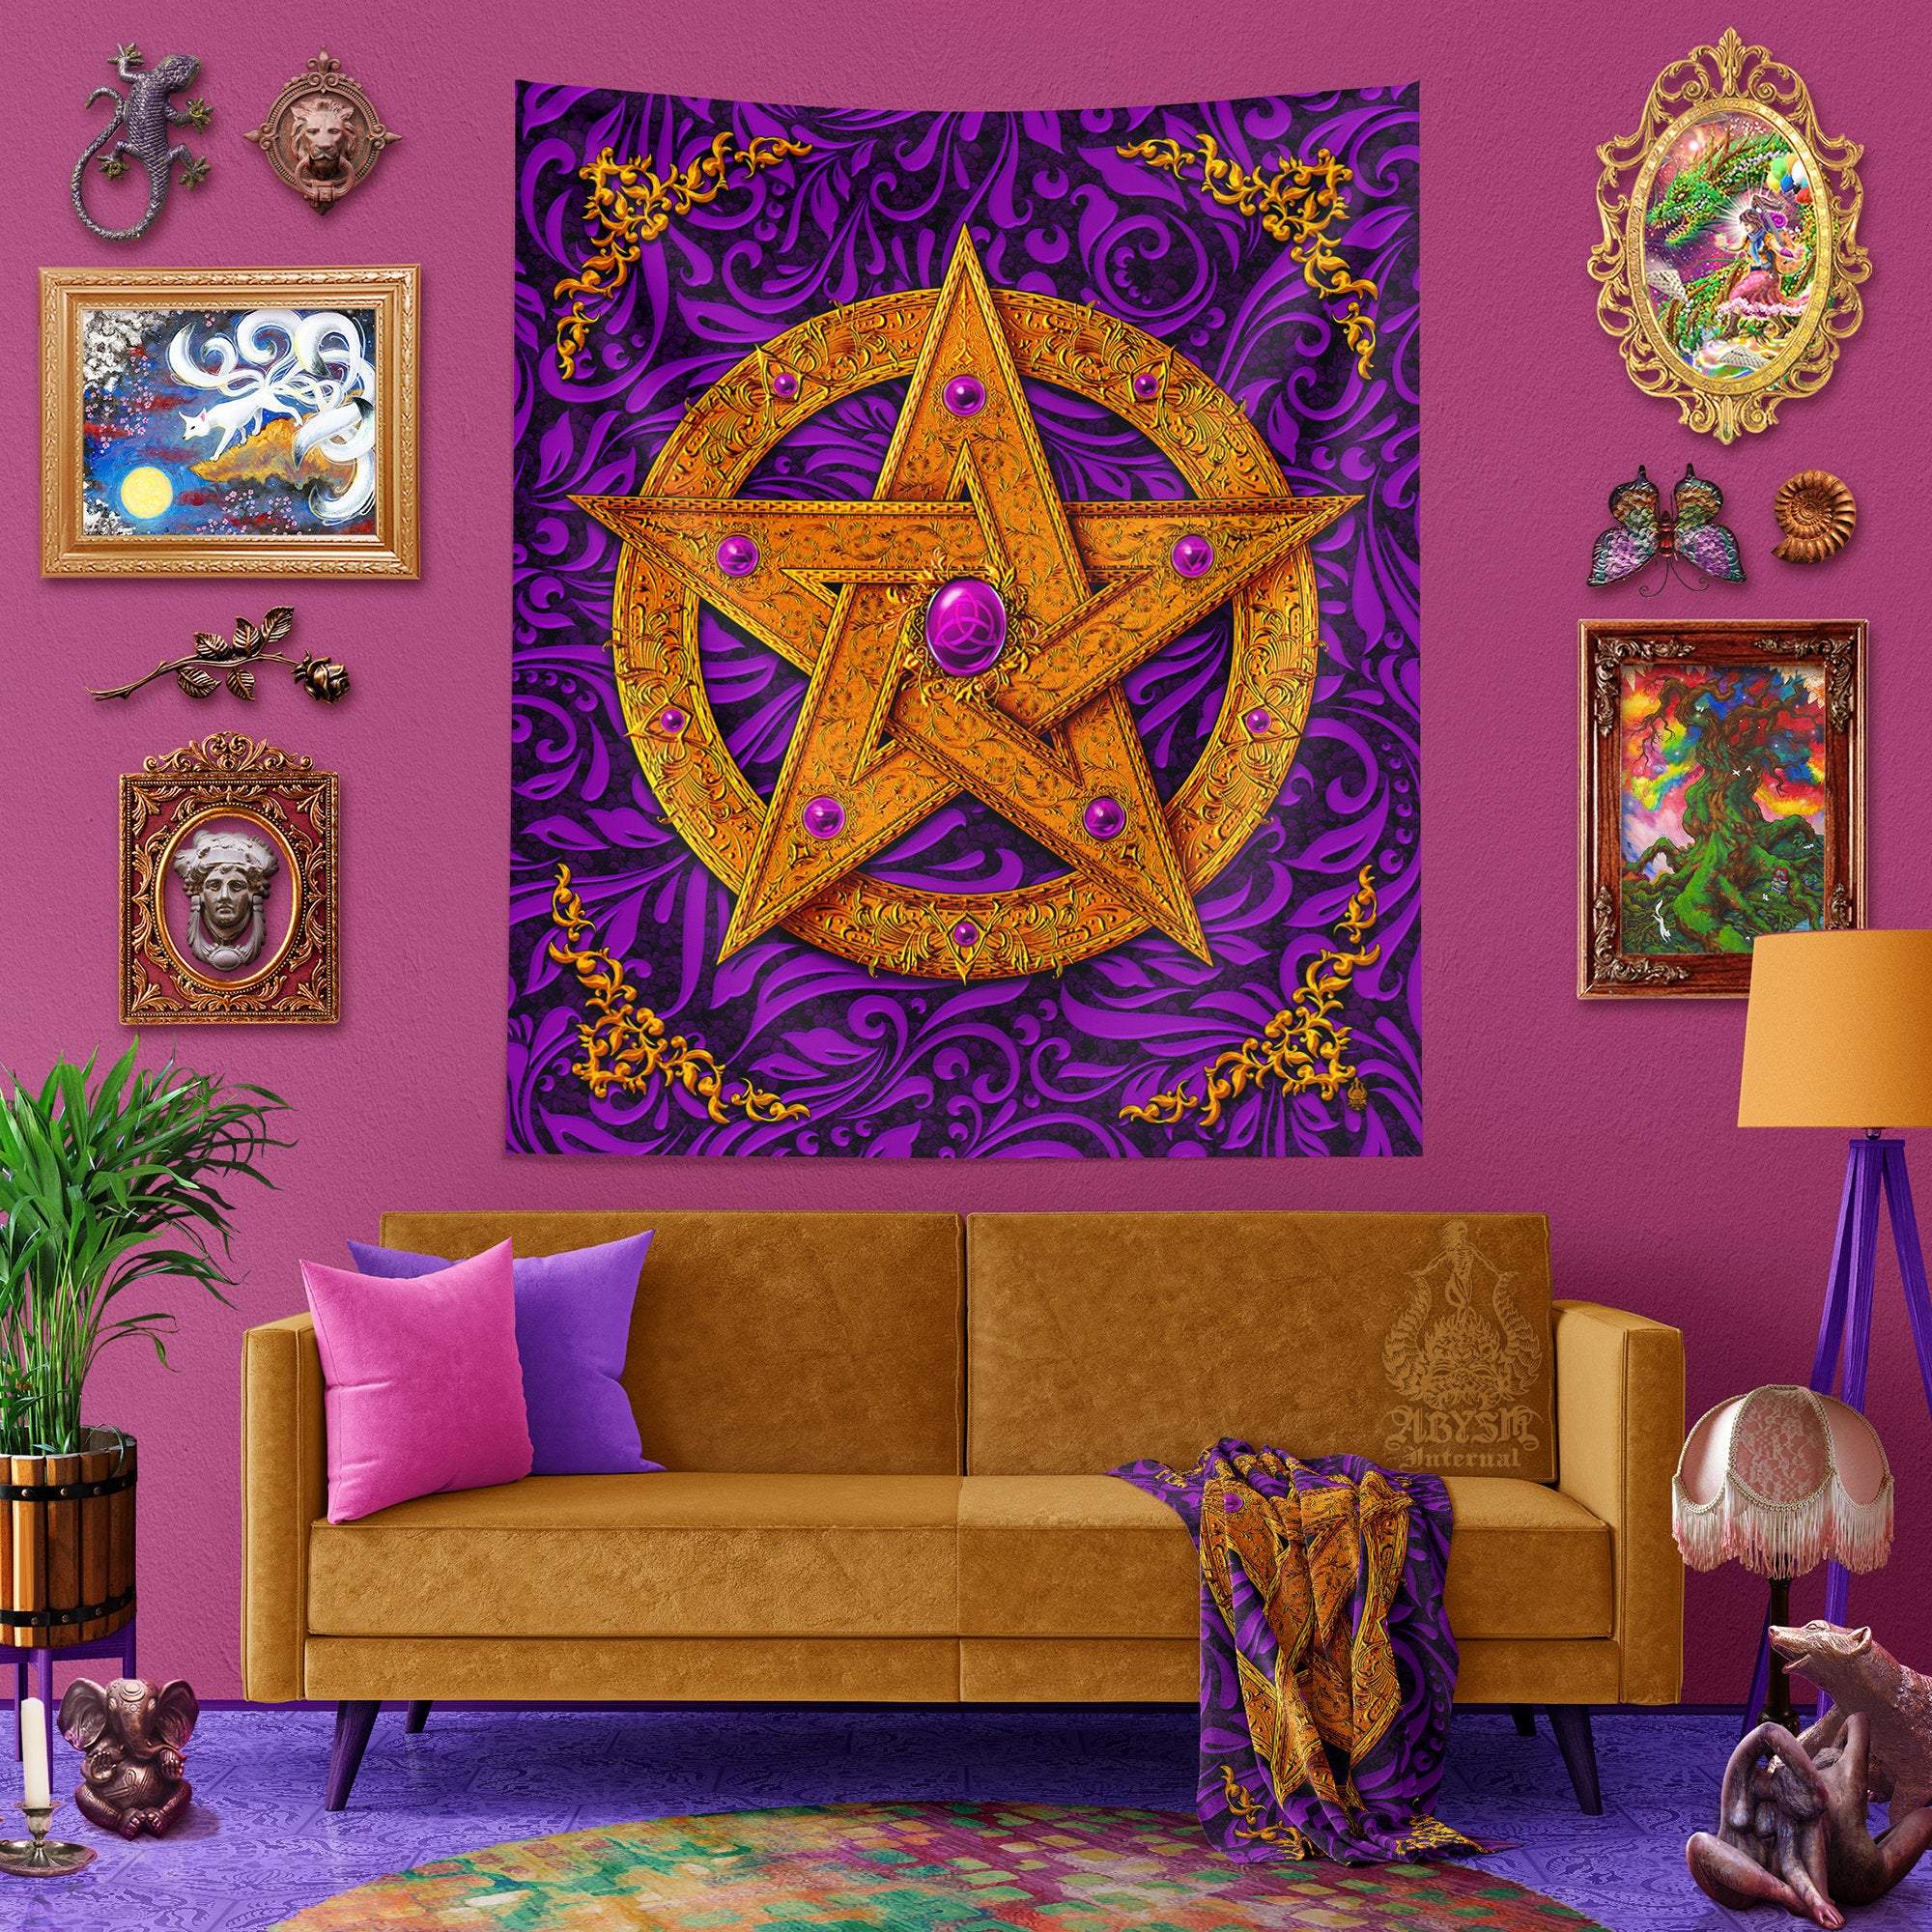 Pentacle Tapestry, Pagan Wiccan Wall Hanging, Witchy Home Decor, Art Print, Eclectic and Funky - 4 Colors - Abysm Internal